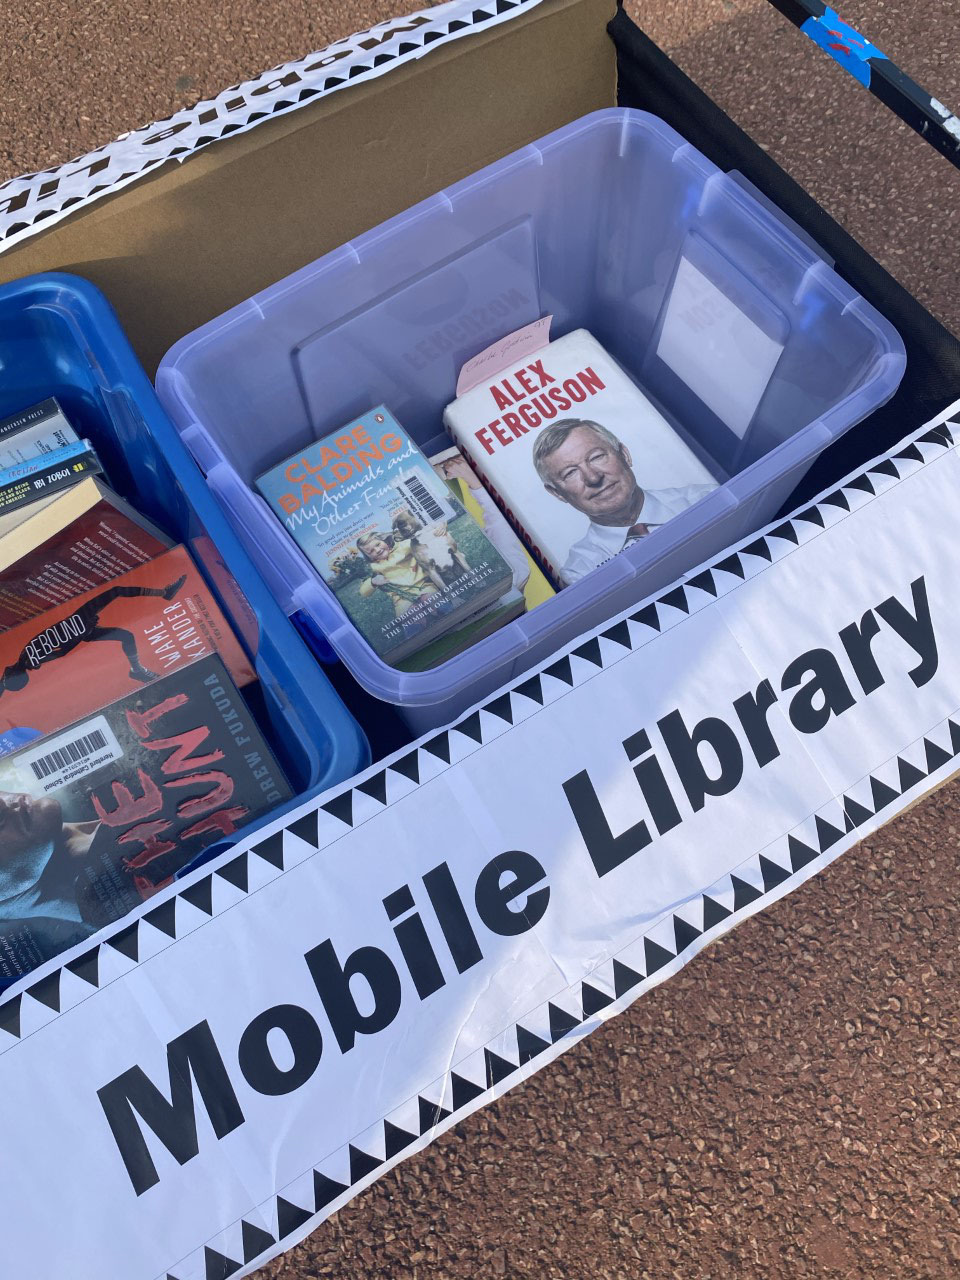 Library trolley